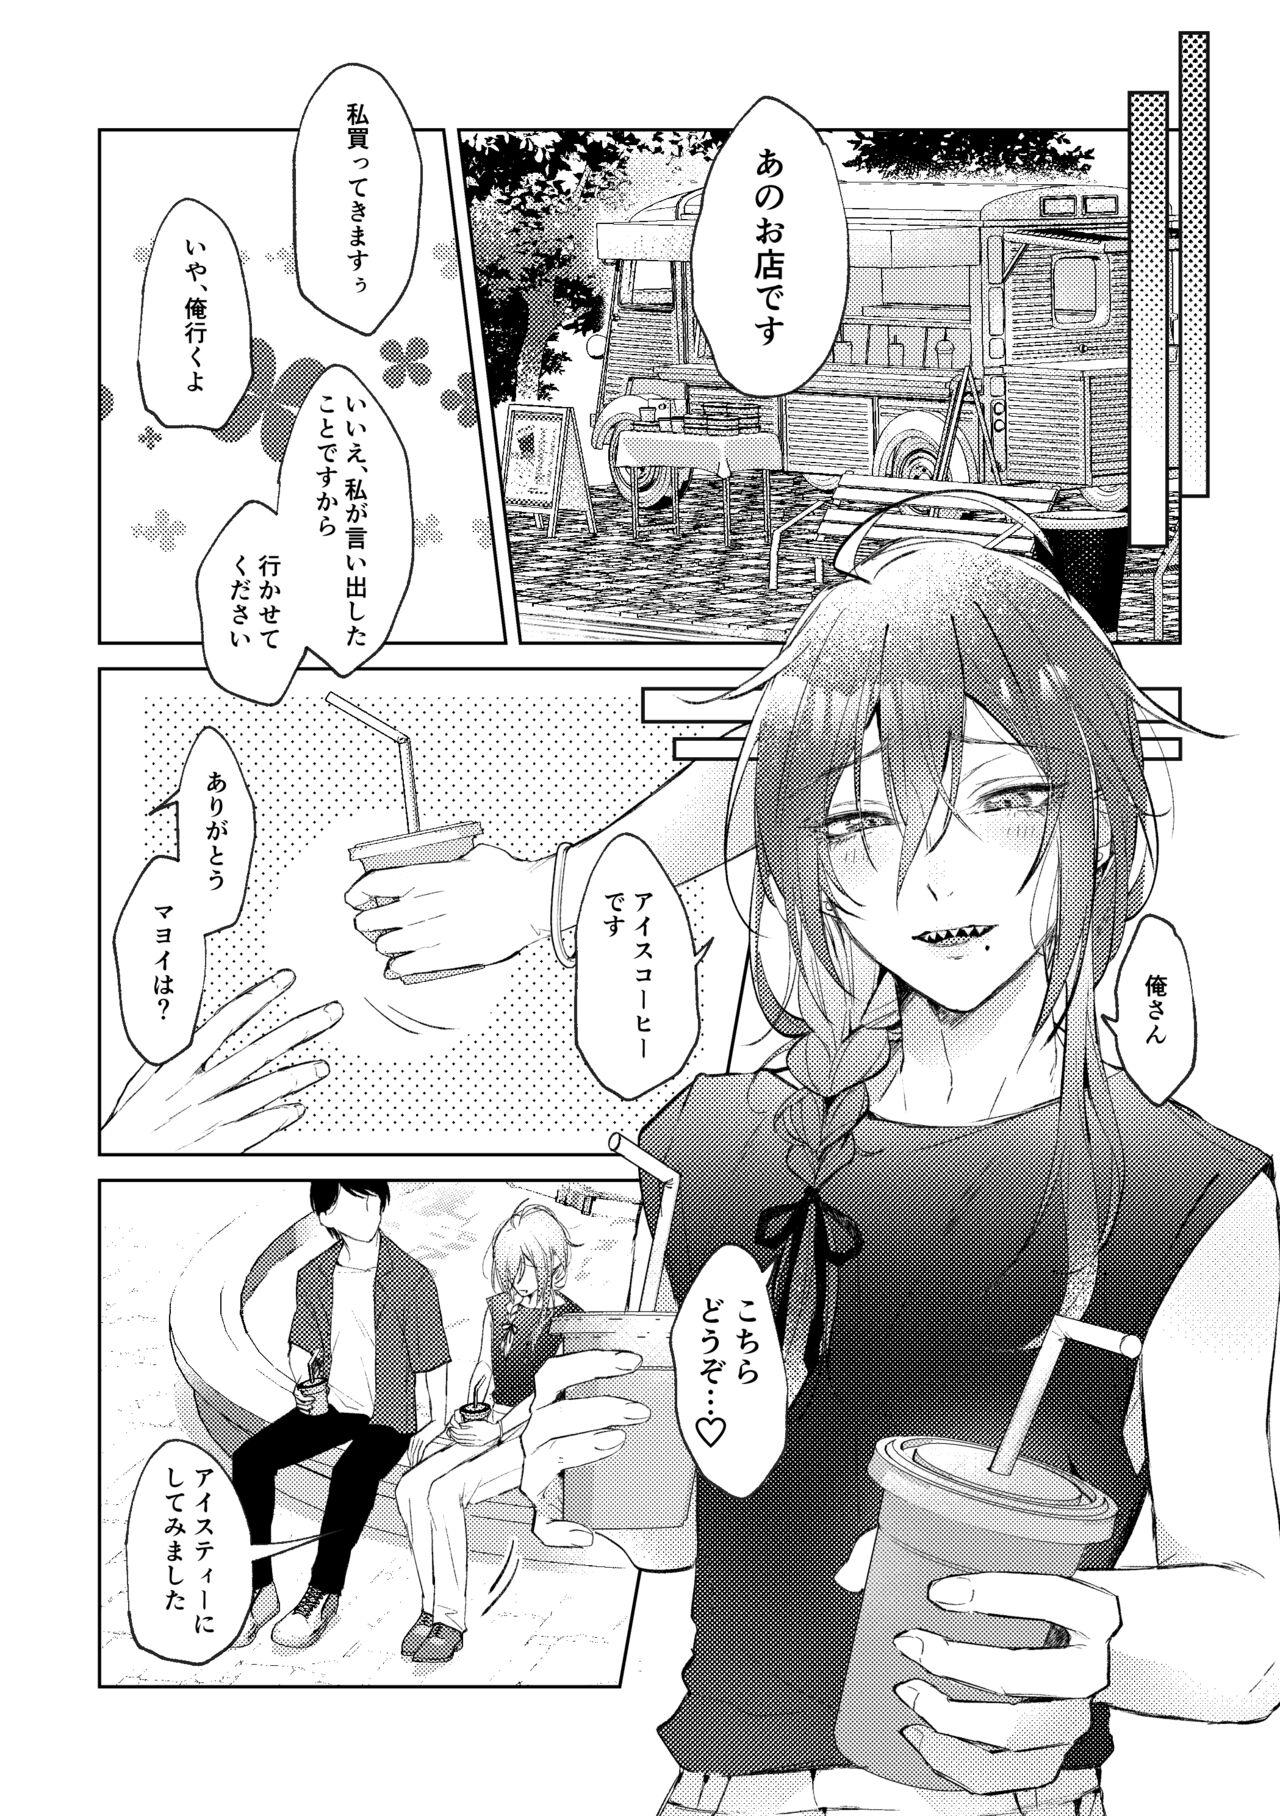 Bubble Butt 俺のカノジョのマヨイくん。 - Ensemble stars Roleplay - Page 10